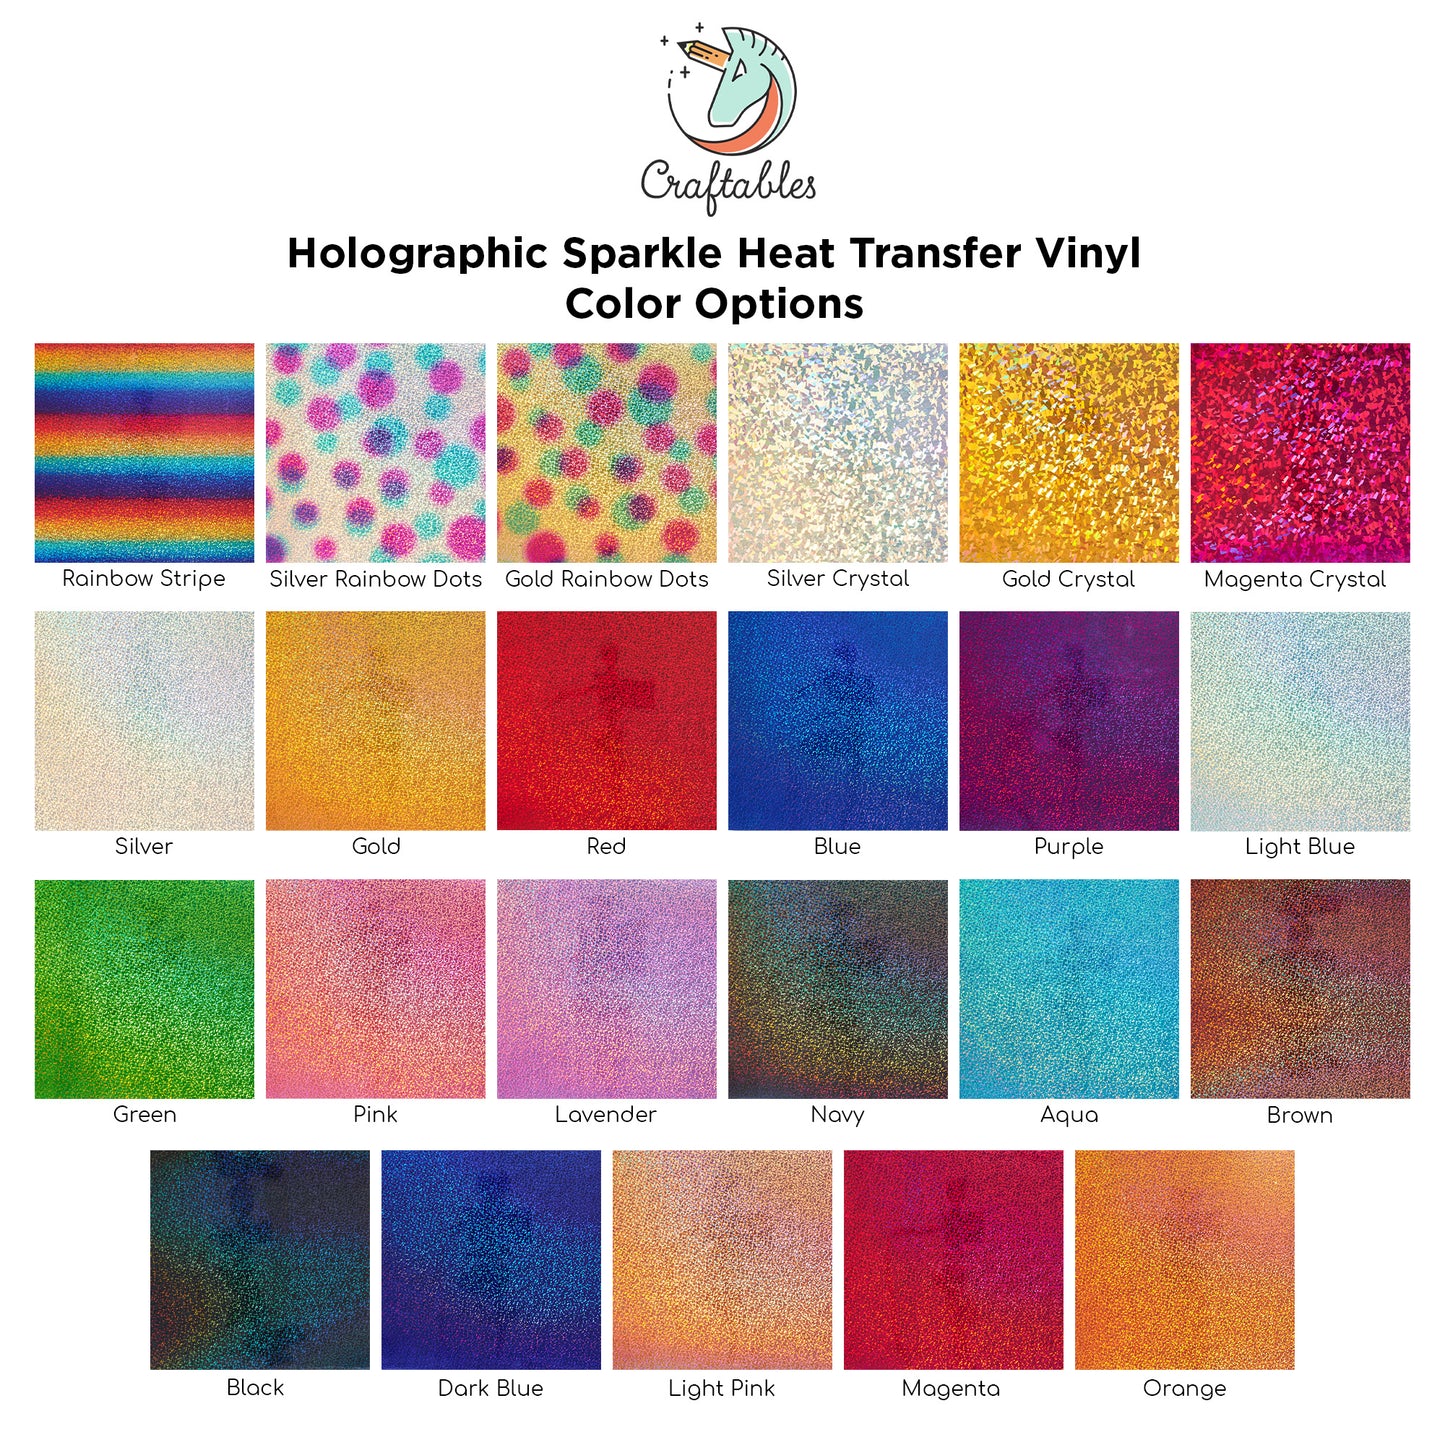 Silver Multi Holographic Sparkle Heat Transfer Vinyl Sheets By Craftables